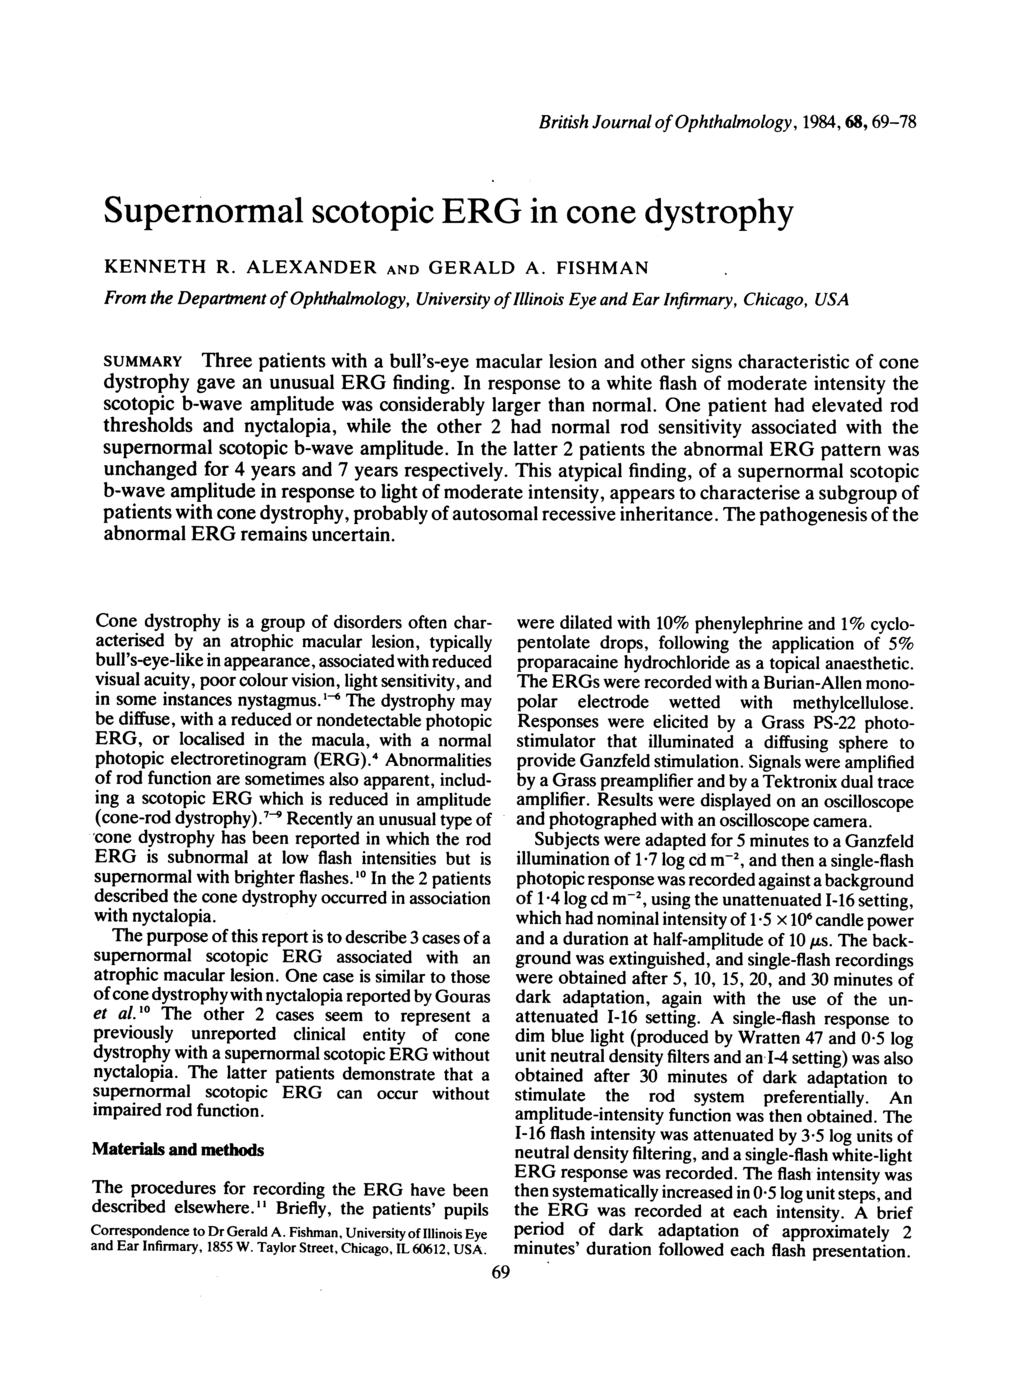 British Journl of Ophthlmology, 1984, 68, 69-78 Supernorml scotopic ERG in cone dystrophy KENNETH R. ALEXANDER AND GERALD A.